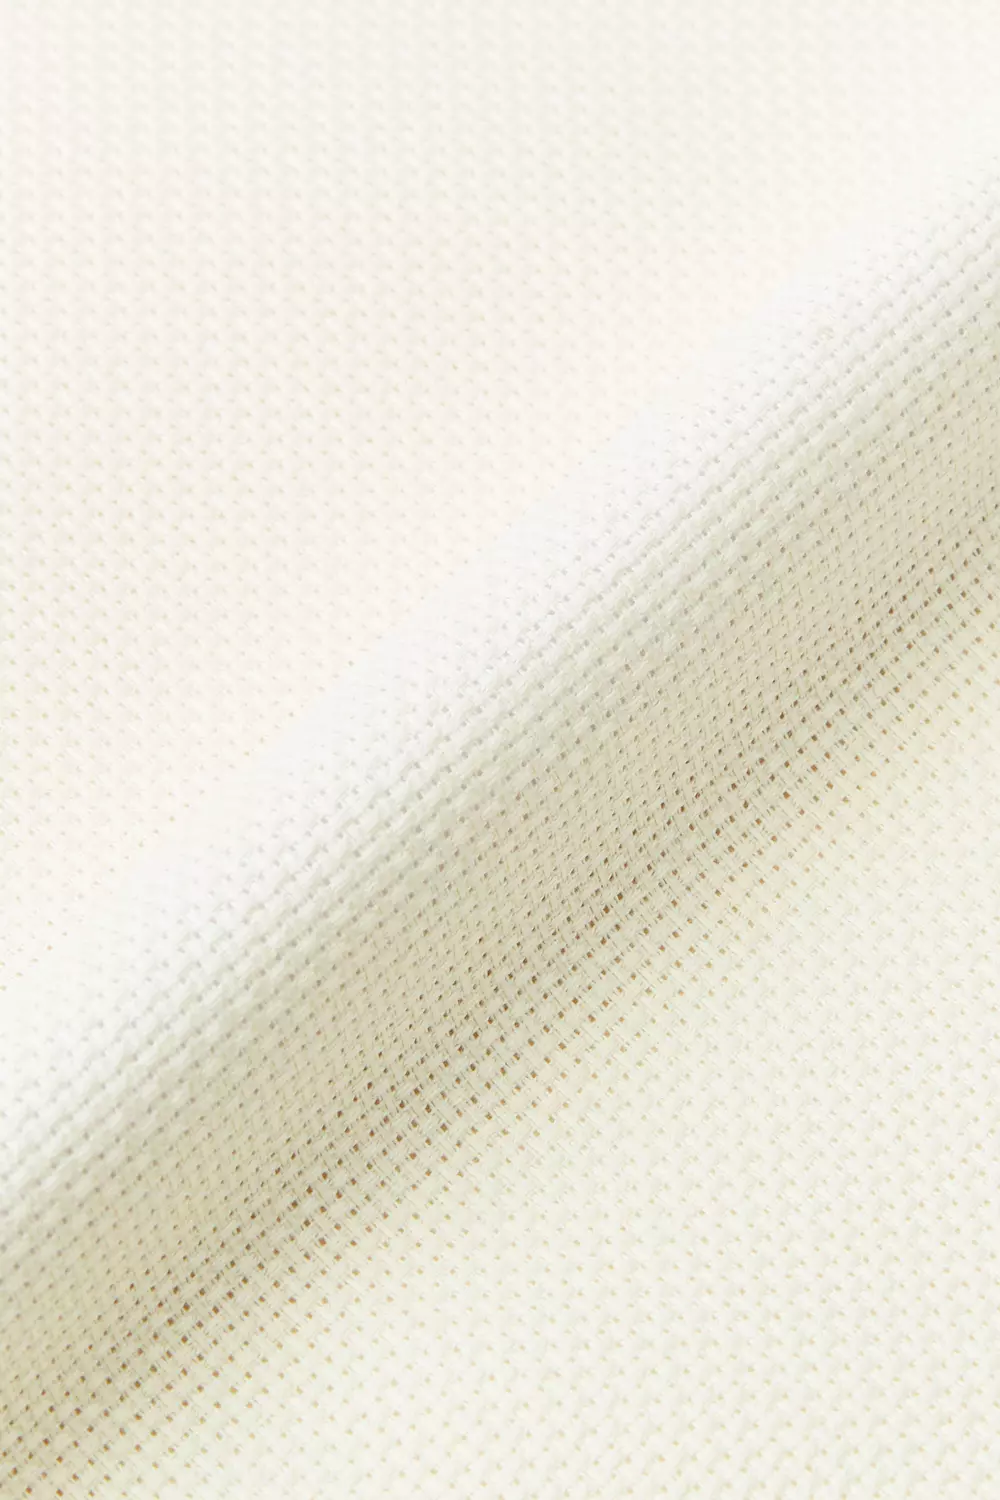  Cookiefabric Cloth for Cross Stitch 9TH 40x40cm Aida Cloth 18ct  28ct 27ct Cross Stitch Fabric Canvas 40ct has defect Point DIY Handcraft  Supplies Stitching - 100x100cm - 14ct - Cross Stitch Fabric